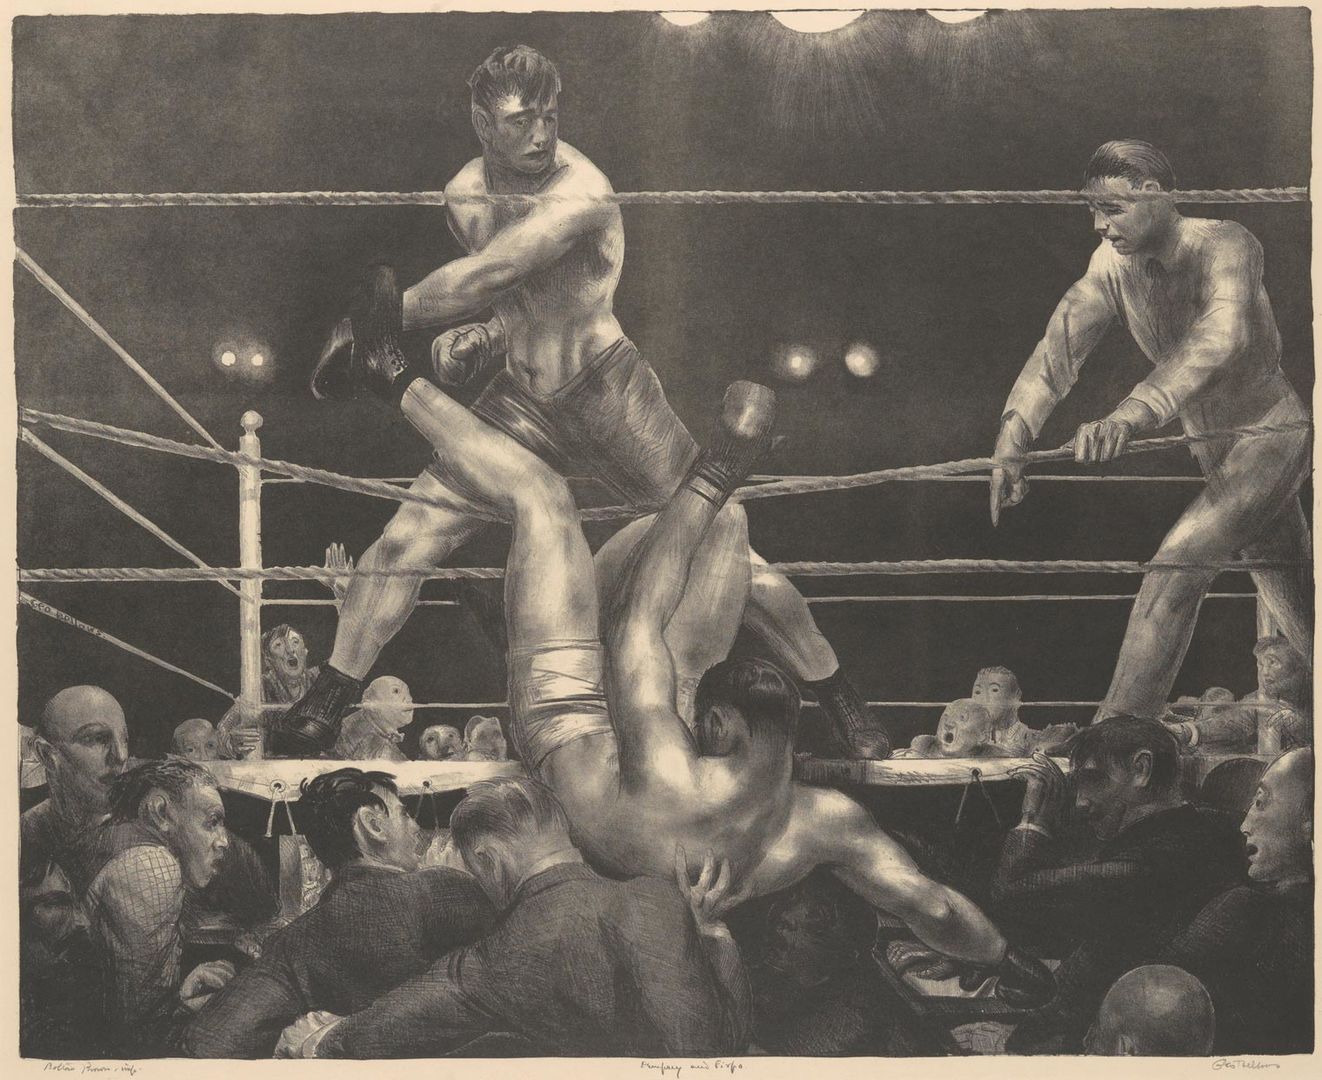 George Bellows lithograph from the 1920s depicting a boxing event in a ring with a crowd of spectators